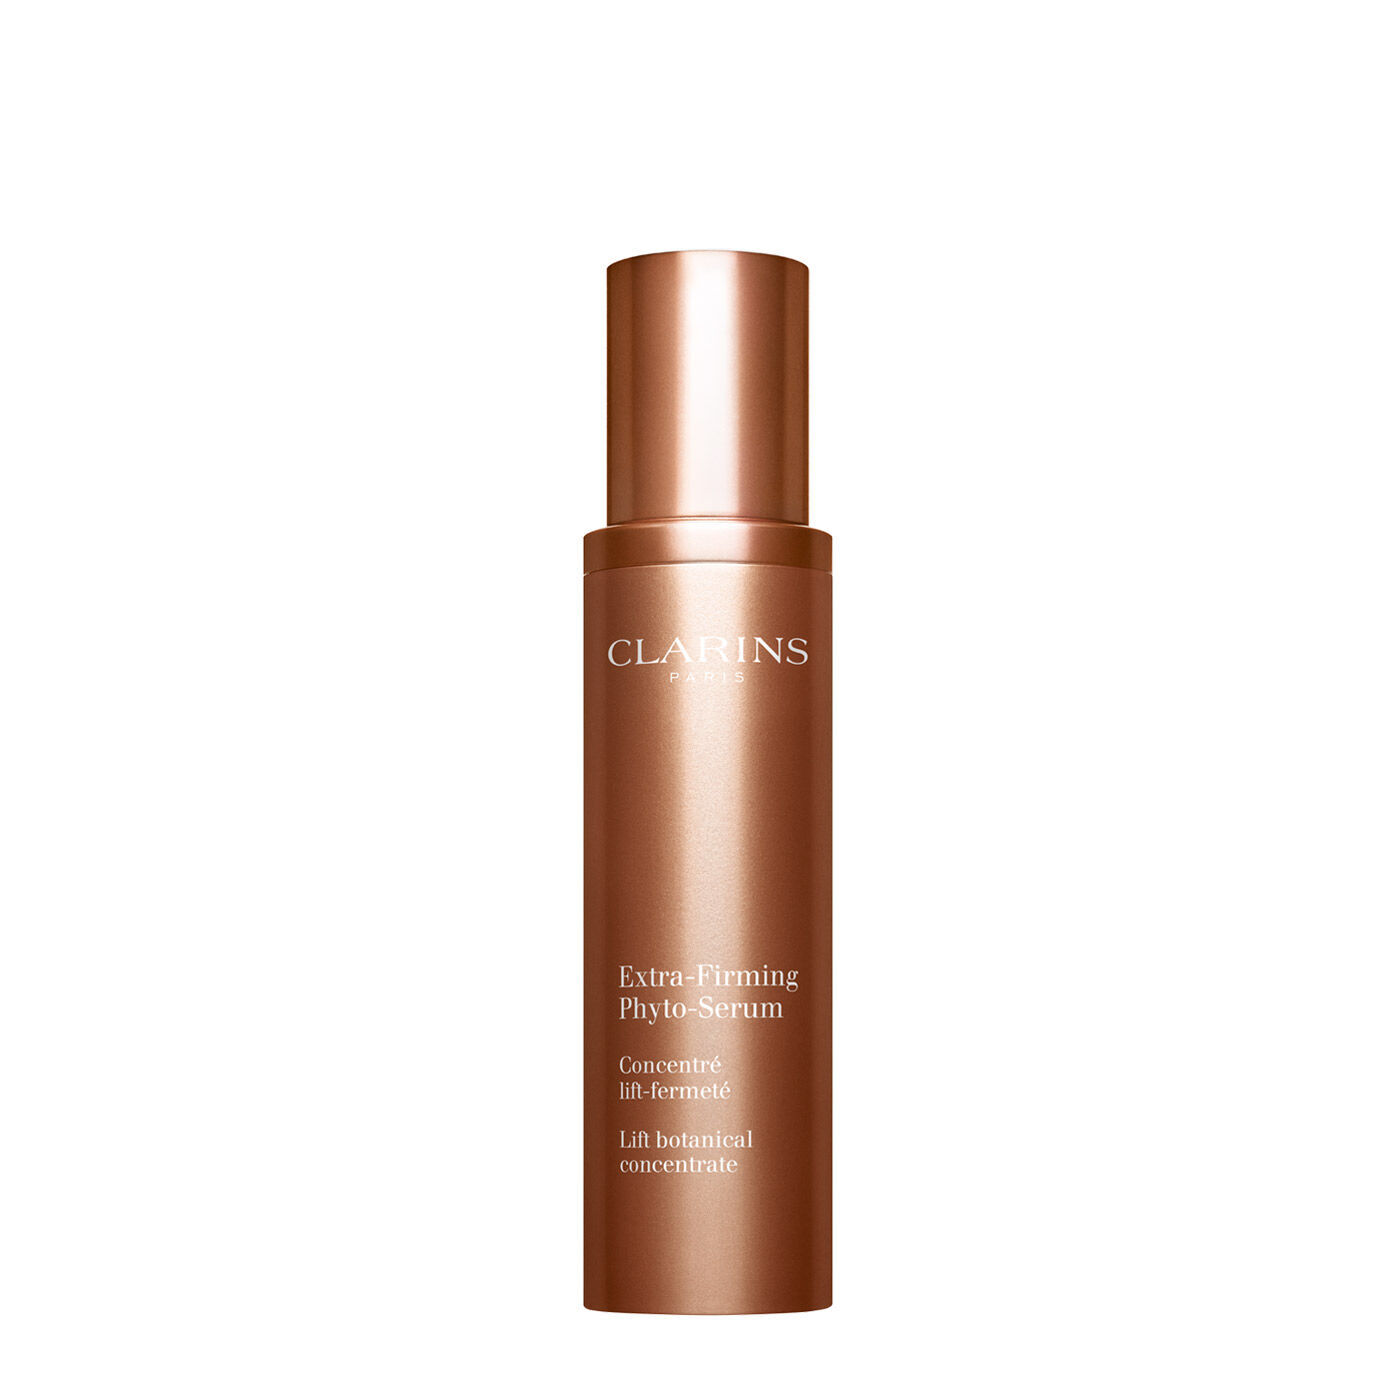 Clarins Extra-Firming Siero Fitotensore